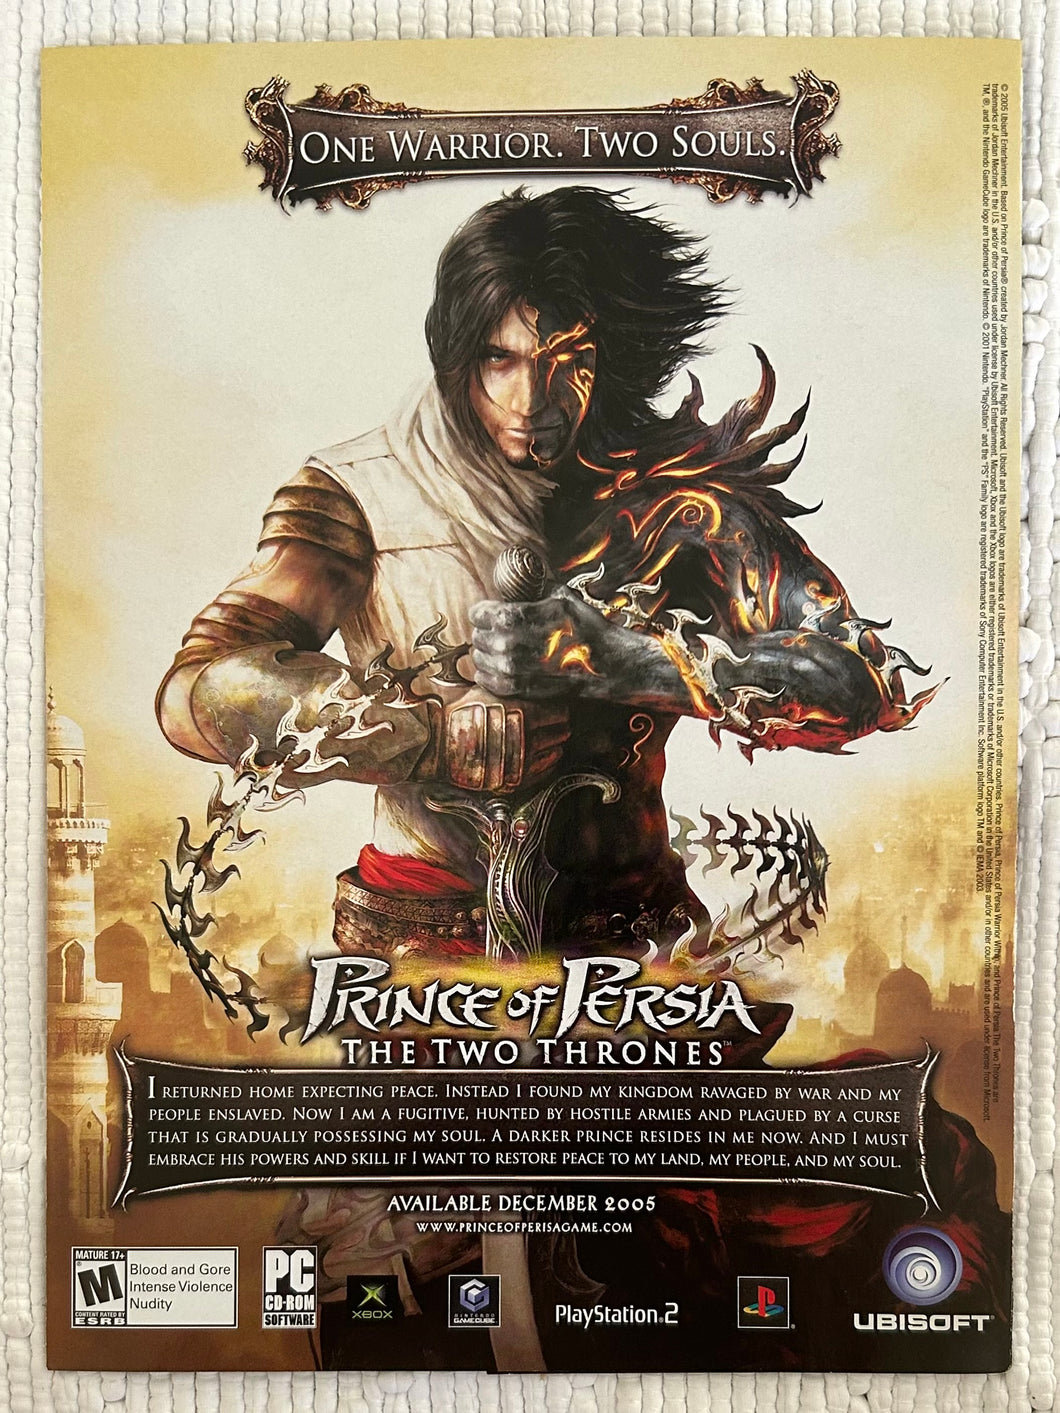 Prince of Persia: The Two Thrones - PS2 Xbox NGC - Original Vintage Advertisement - Print Ads - Laminated A4 Poster